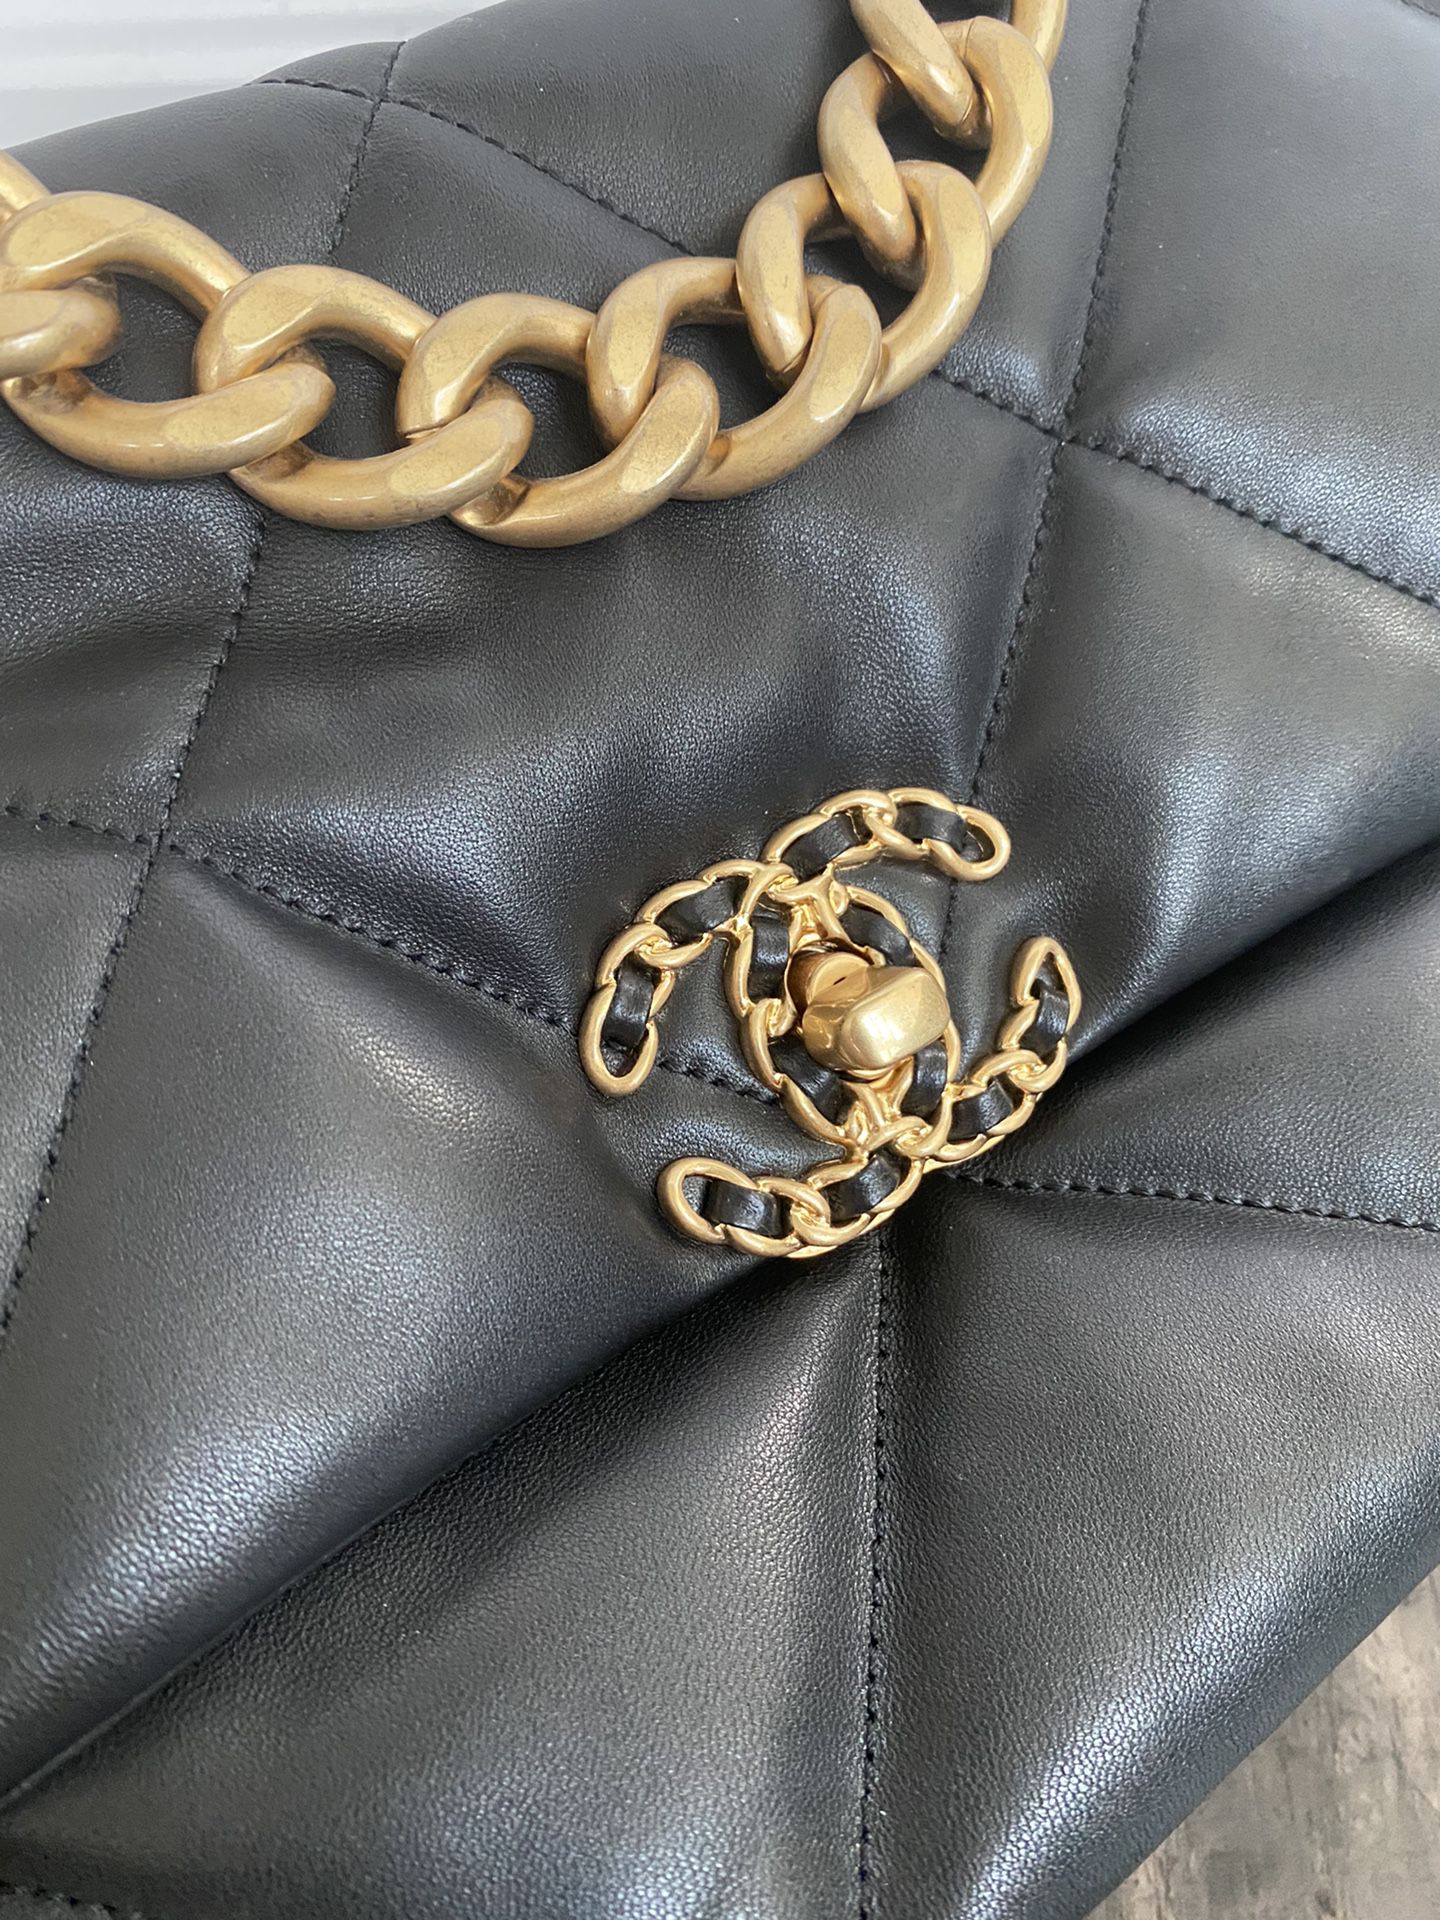 Chanel 19 Black Lambskin Large Crossbody Bag for Sale in Florence